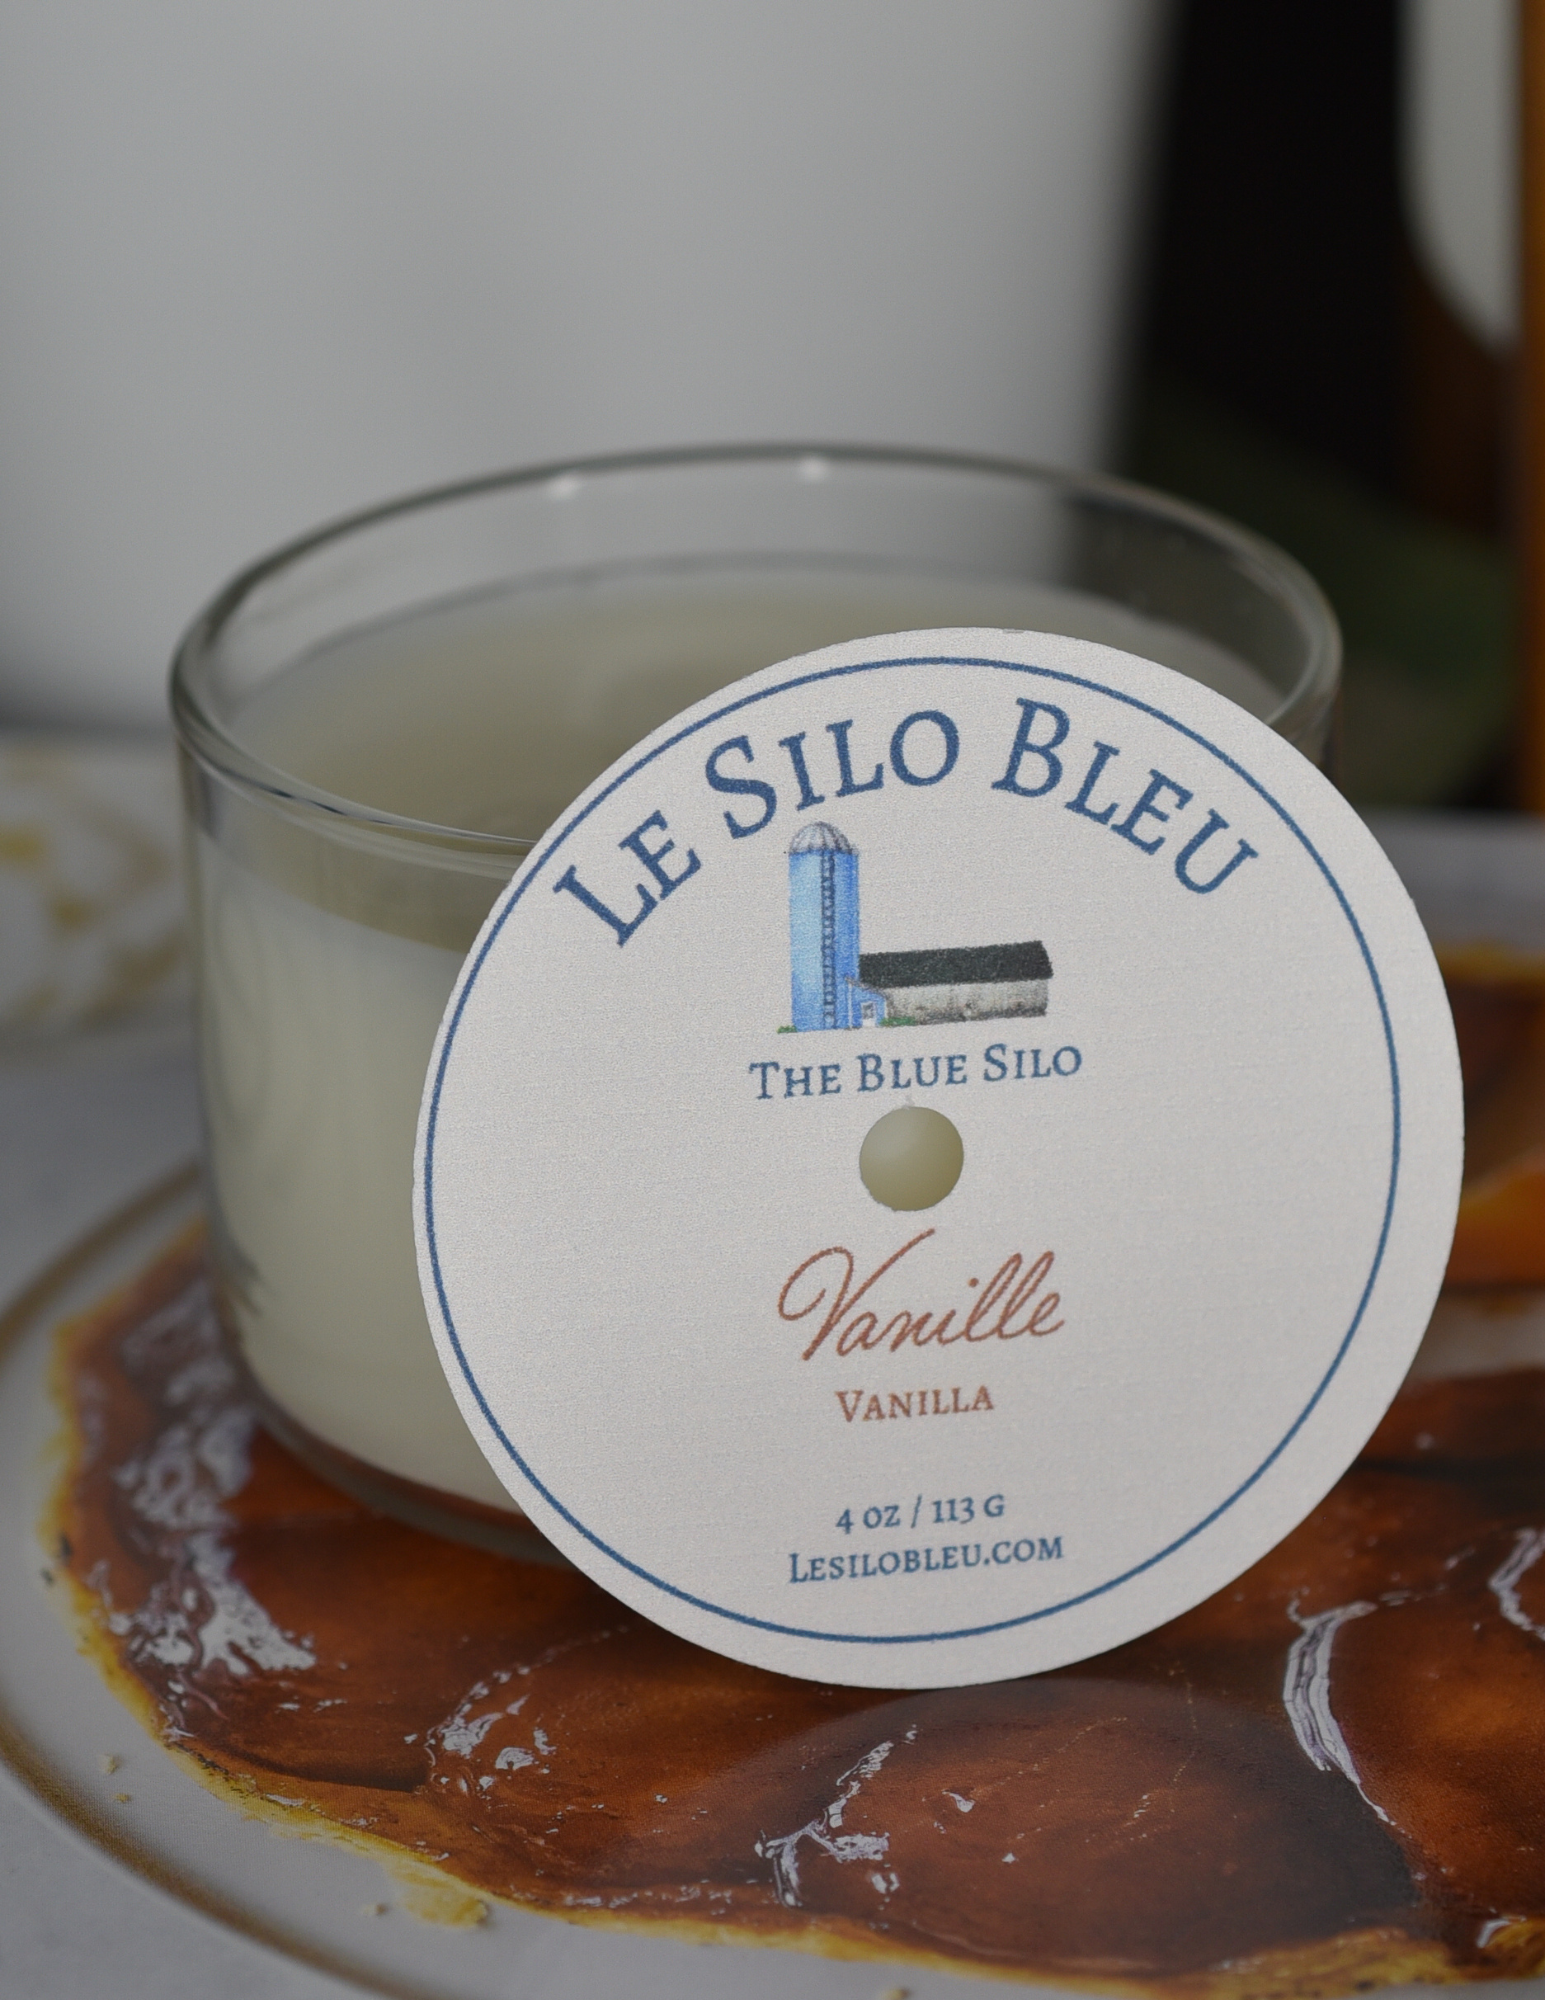 A vanilla  scented candle is sitting on top of a French magazine with a plant in a white pot in the background.